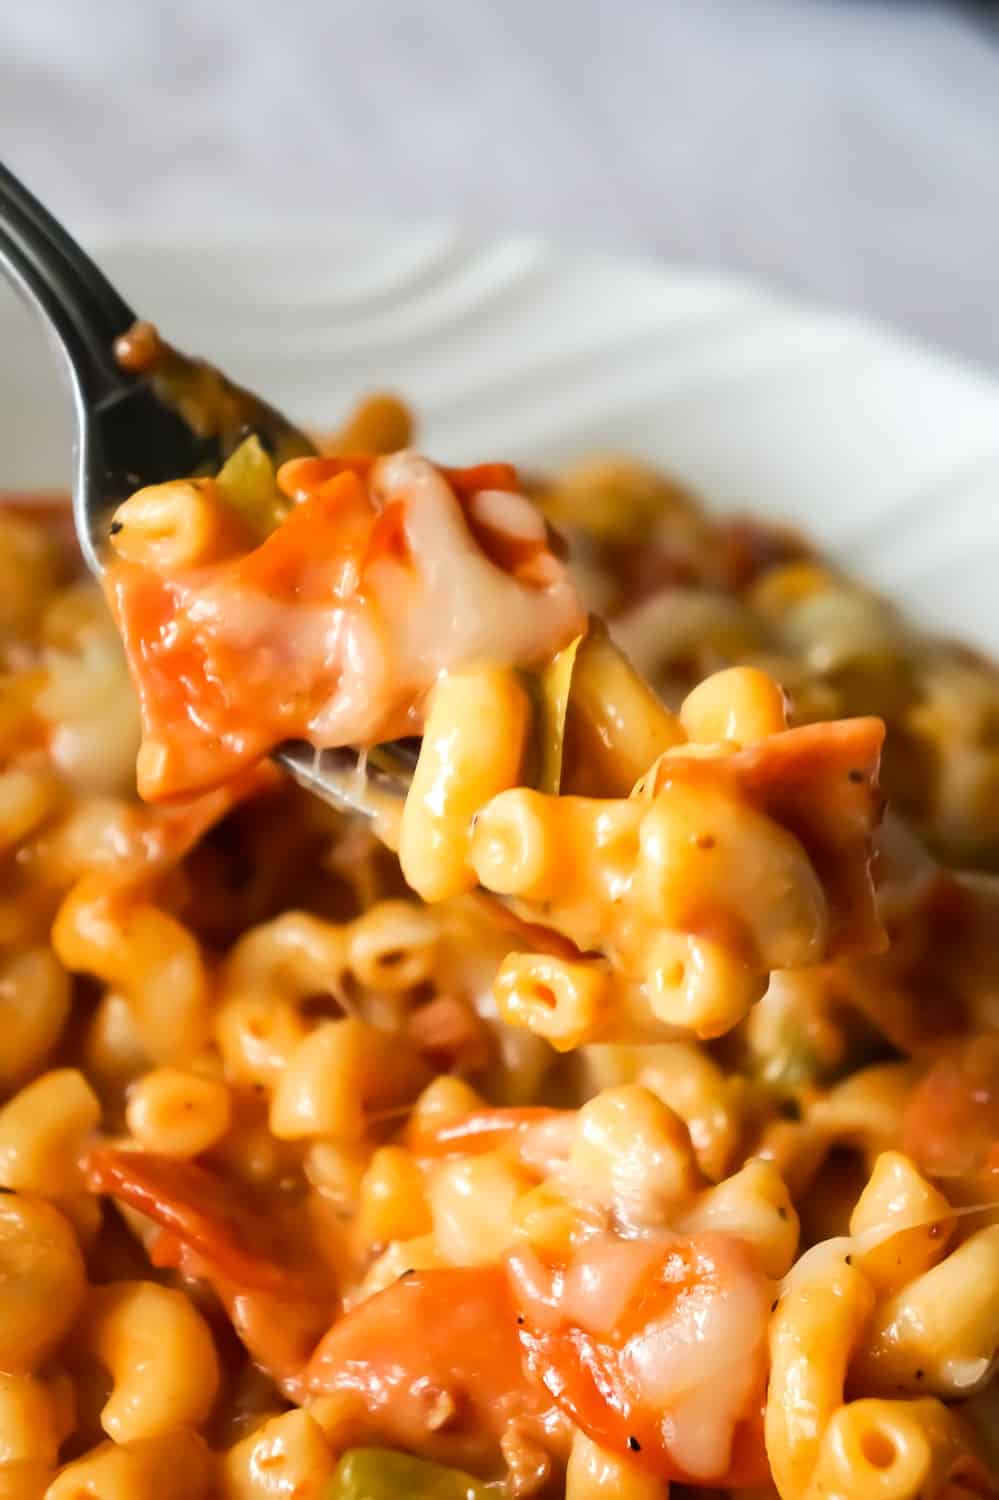 Instant Pot Pizza Mac and Cheese is a delicious pressure cooker pasta recipe loaded with pepperoni, green peppers, crumbled bacon and mozzarella cheese.